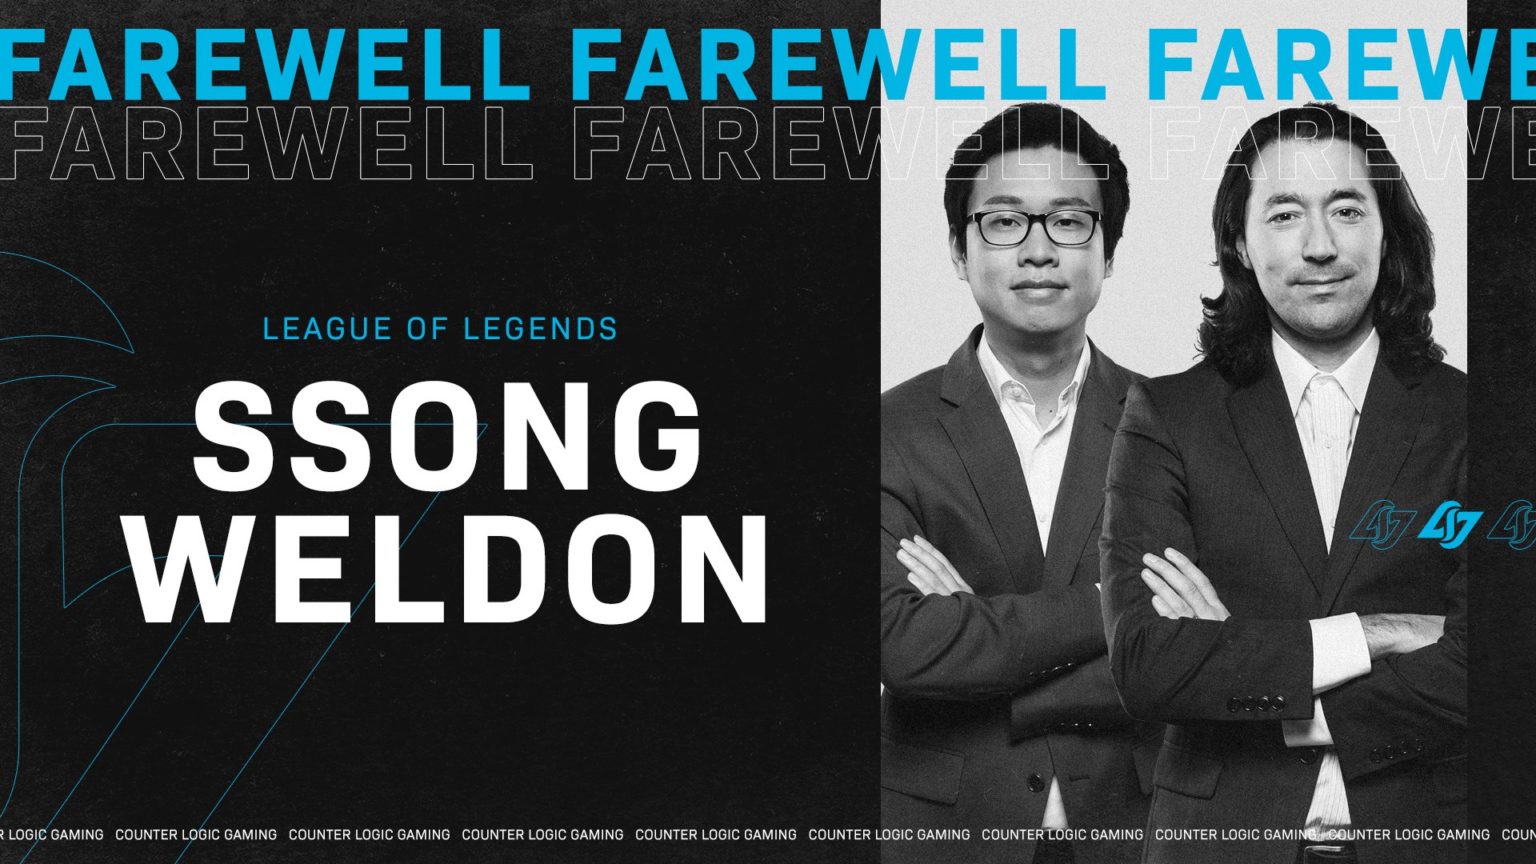 CLG releases Coaches Ssong and Weldon